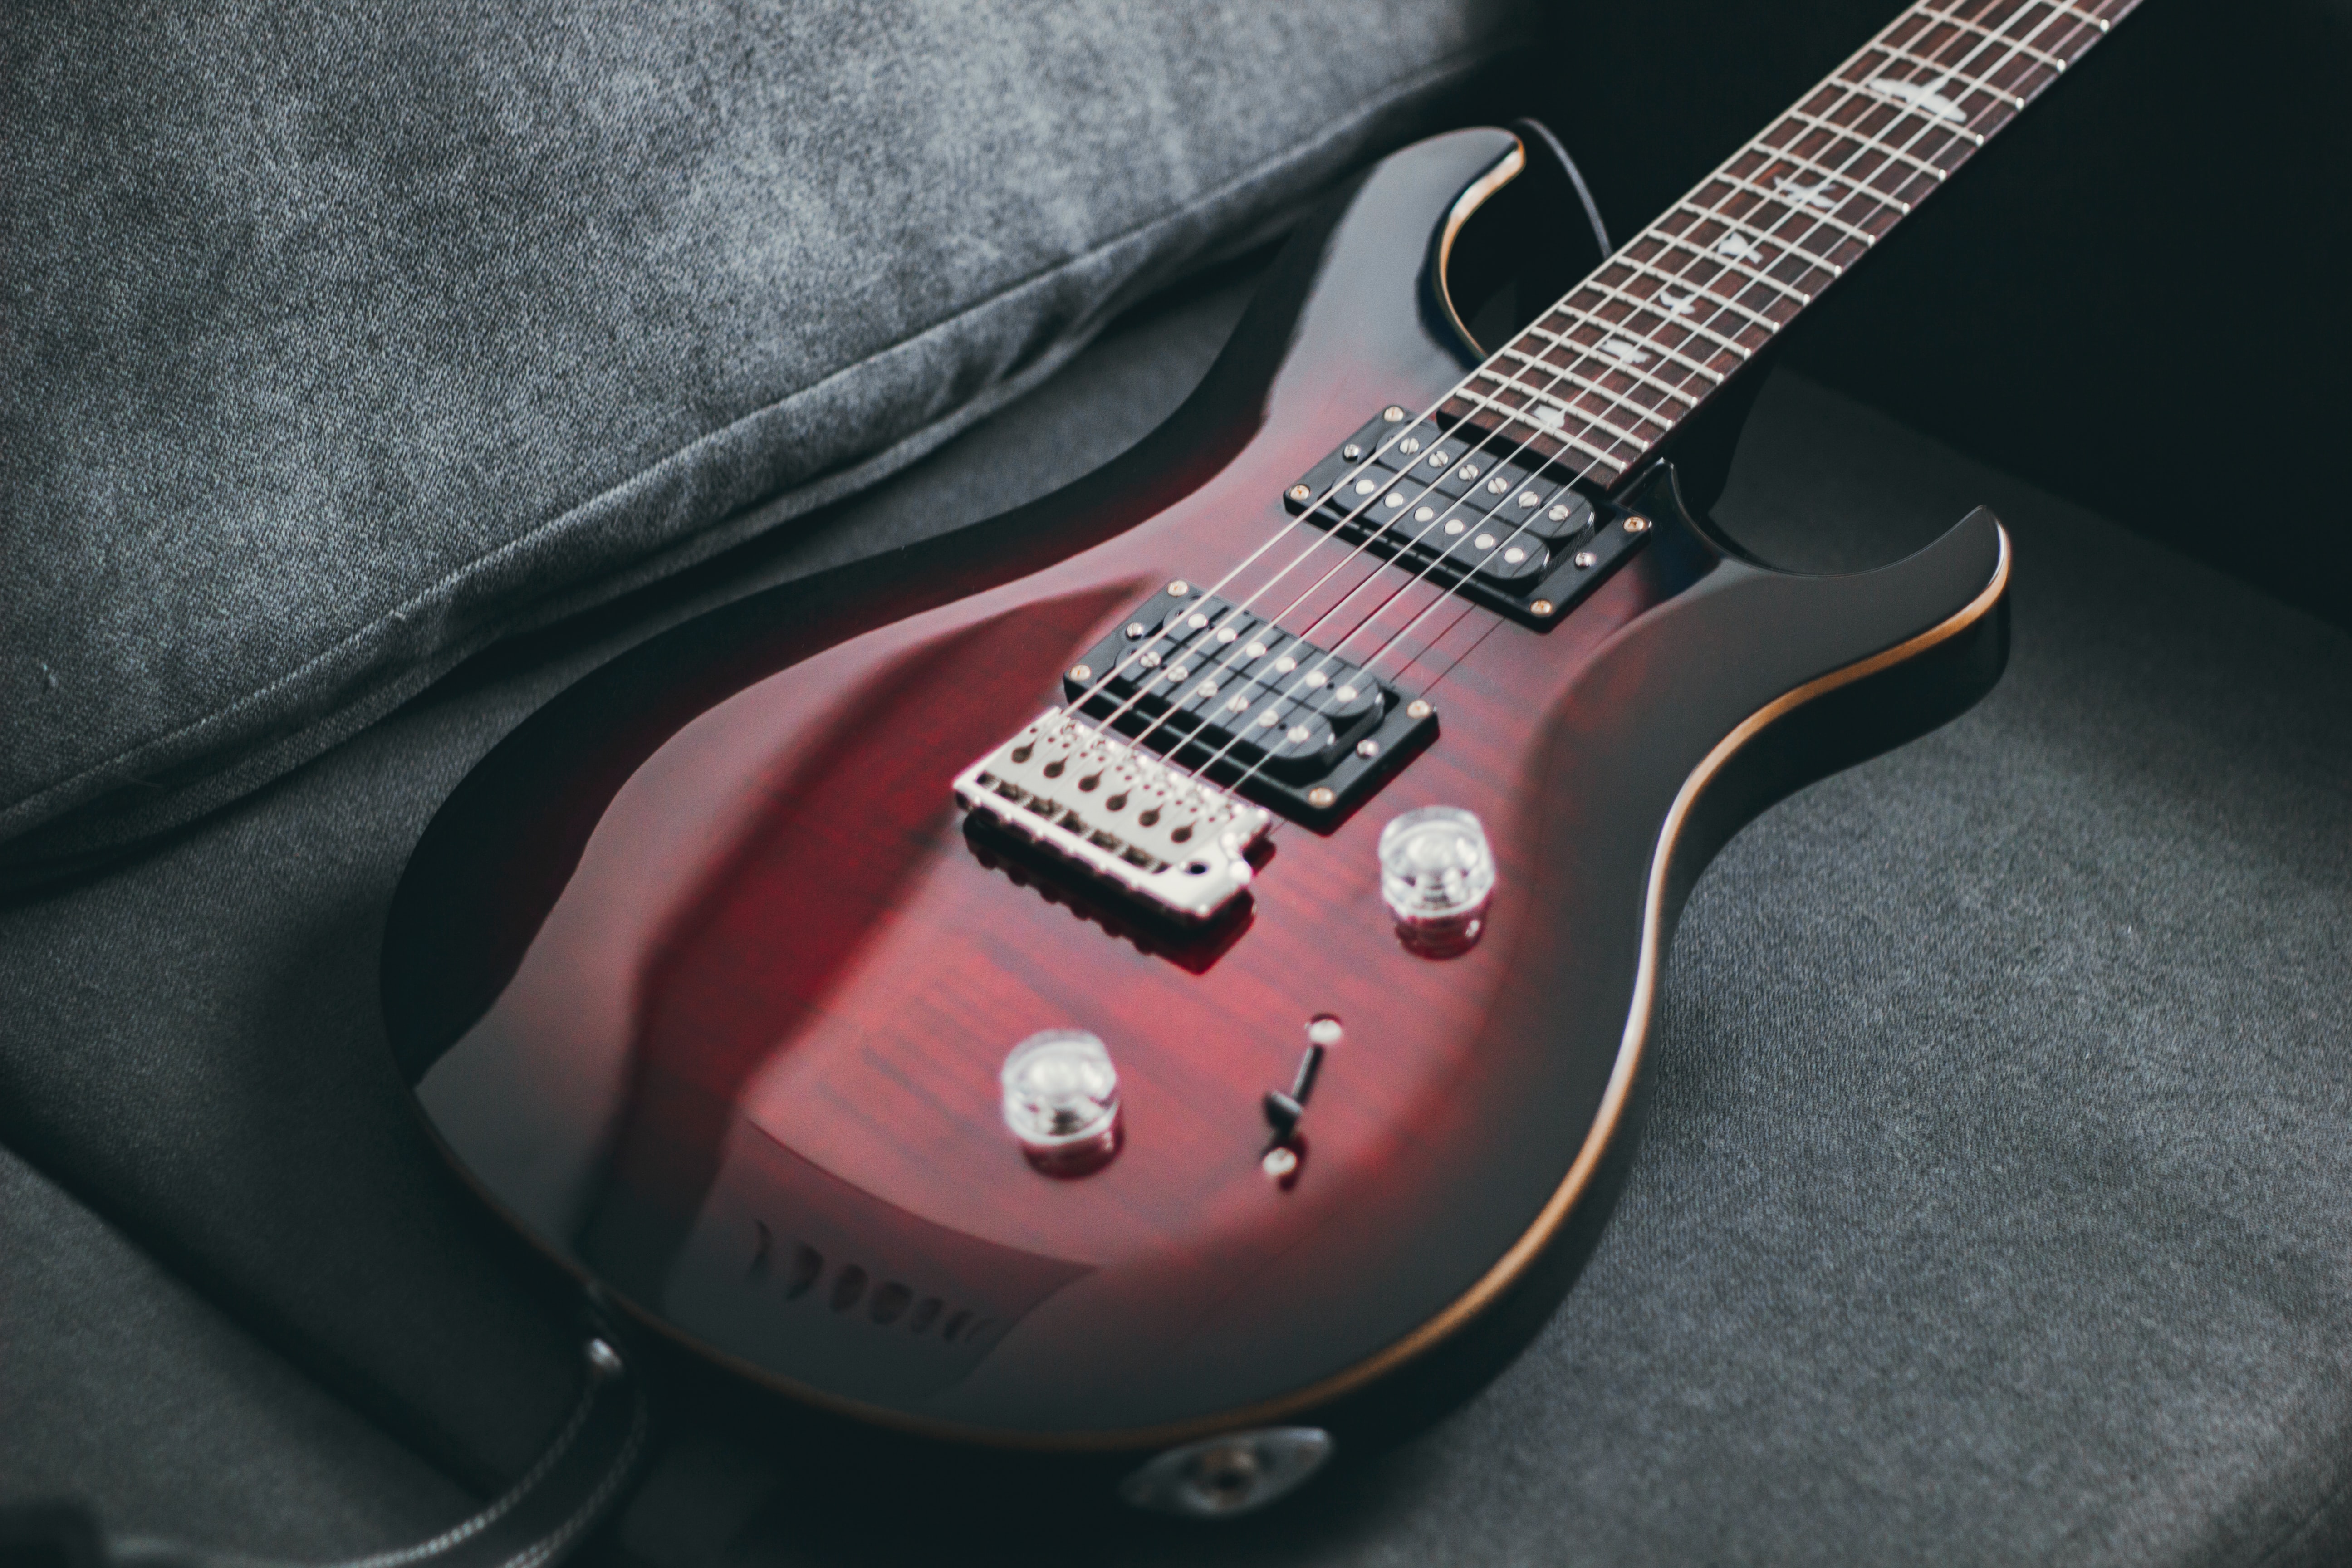 Red Burst PRS guitar on a couch